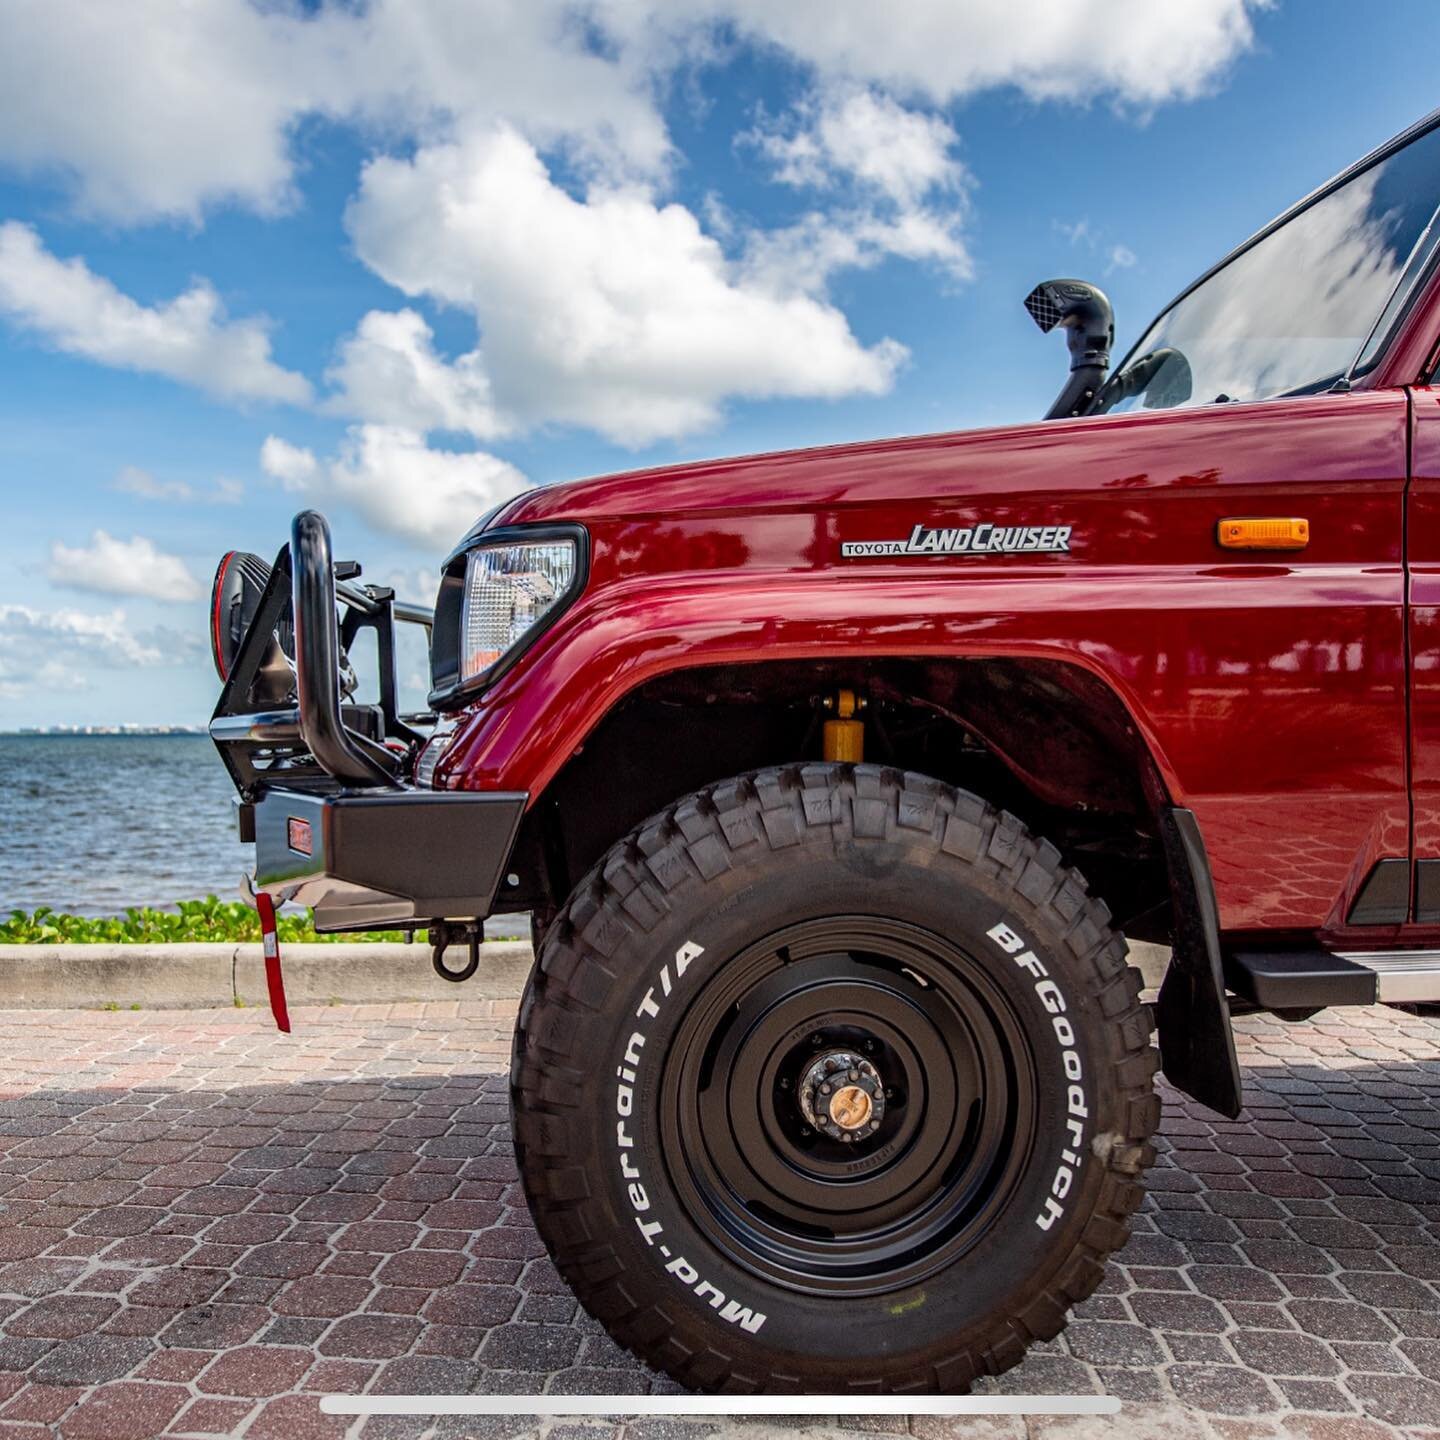 This Left Hand Drive 1990 LJ77 has 92,000 miles and is almost ready for sale. The good folks at @landcruiserheaven.se are just putting the finishing touches on her. This Land Cruiser is fully loaded so reach out before she&rsquo;s gone! Build specs b